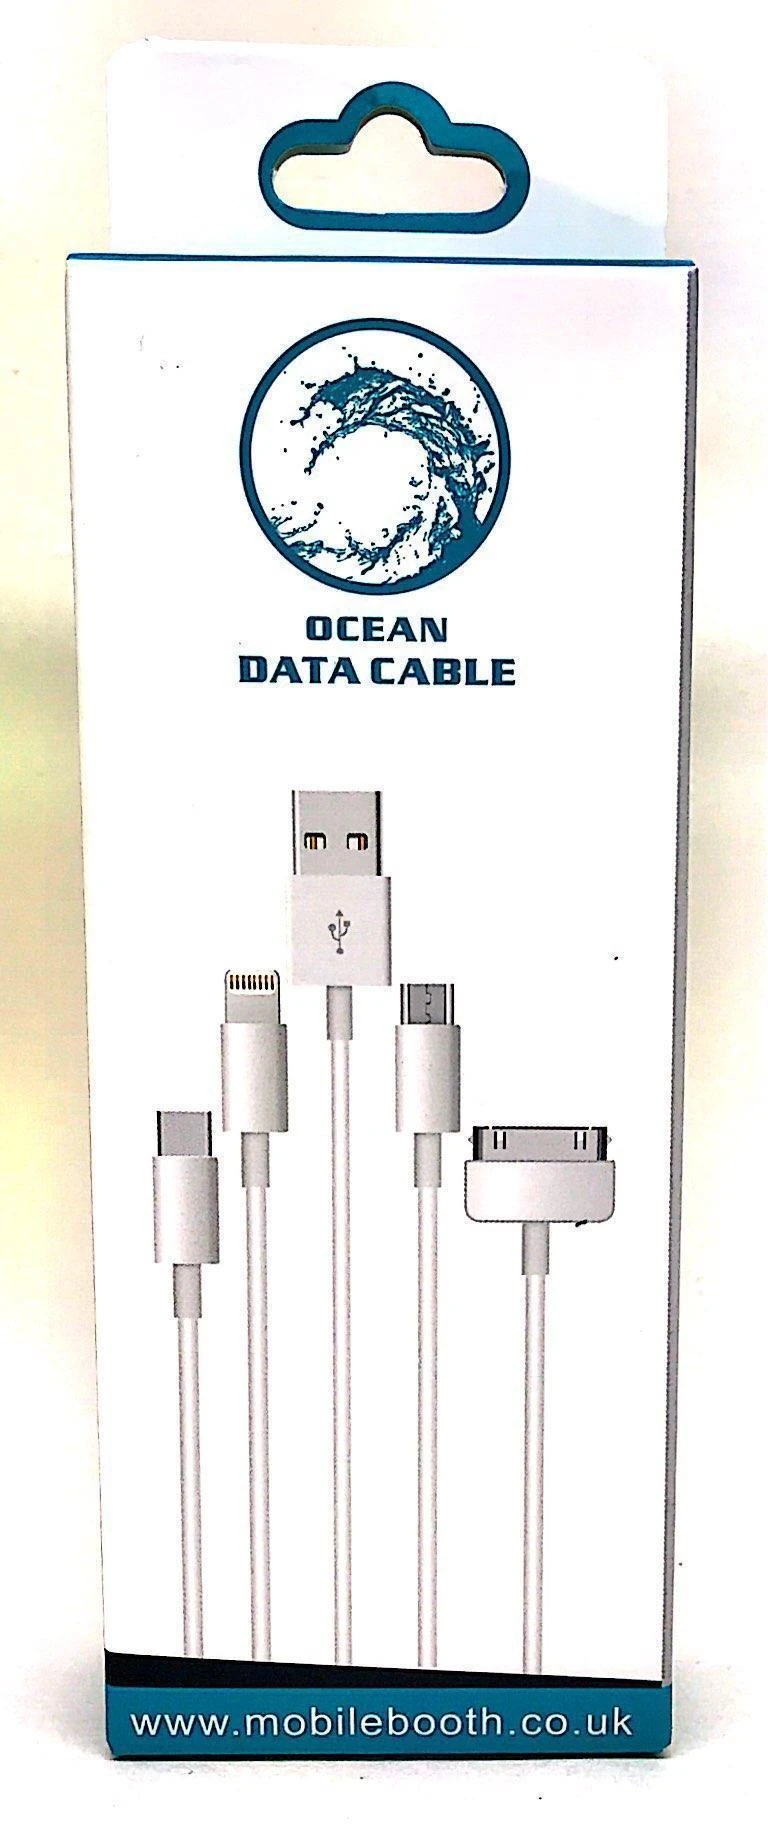 DATA CABLE PACKING